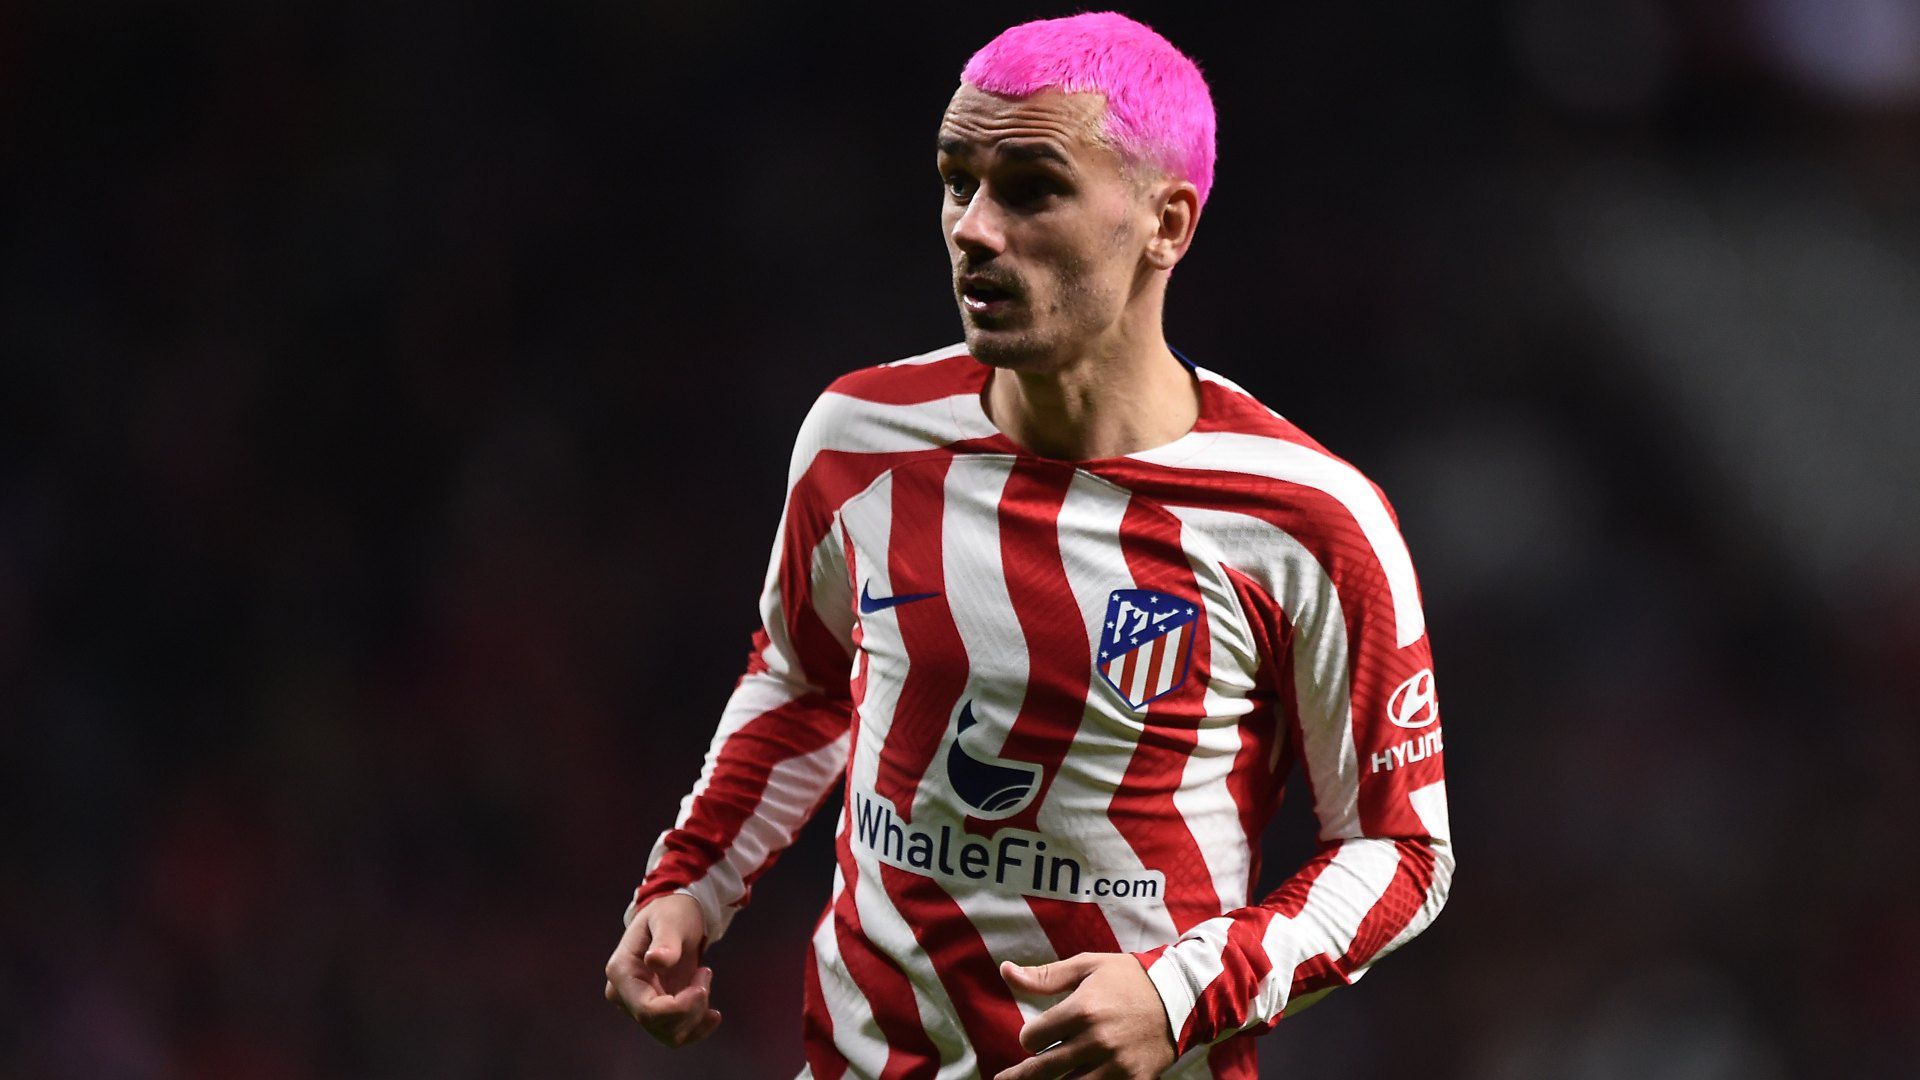 The famous football player explained the reason for the bizarre hairstyle